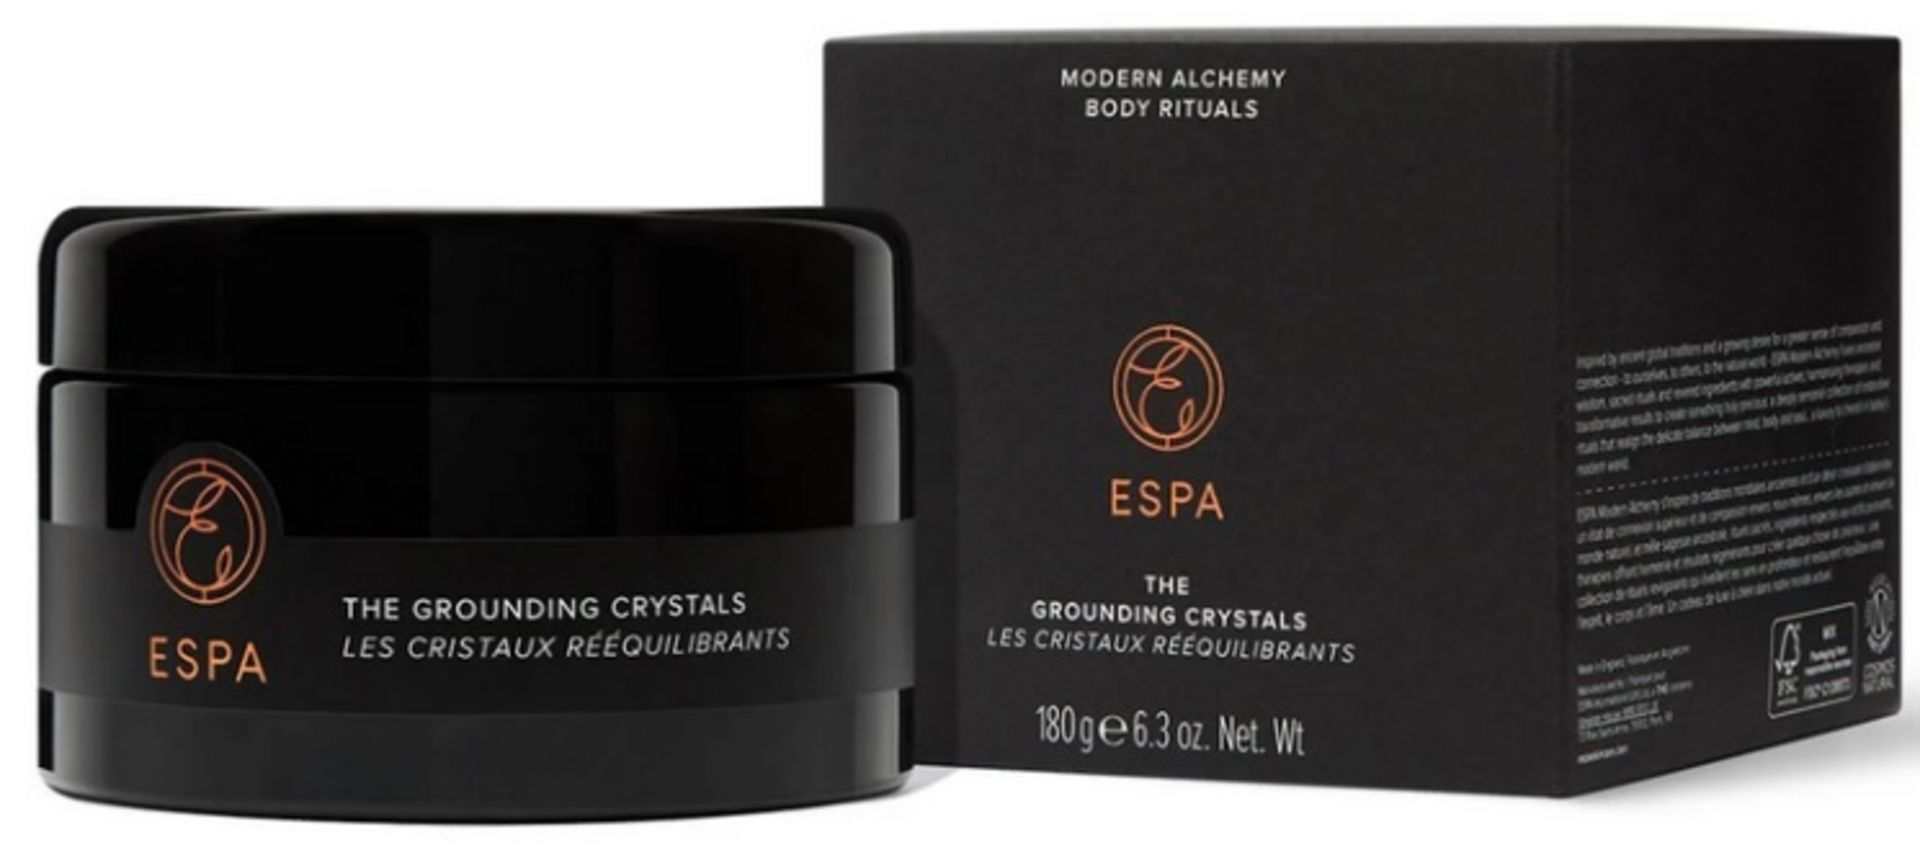 10x NEW & BOXED ESPA The Grounding Crystals 180g. RRP £35 each. (R12-14). Create your own bathing - Image 2 of 2